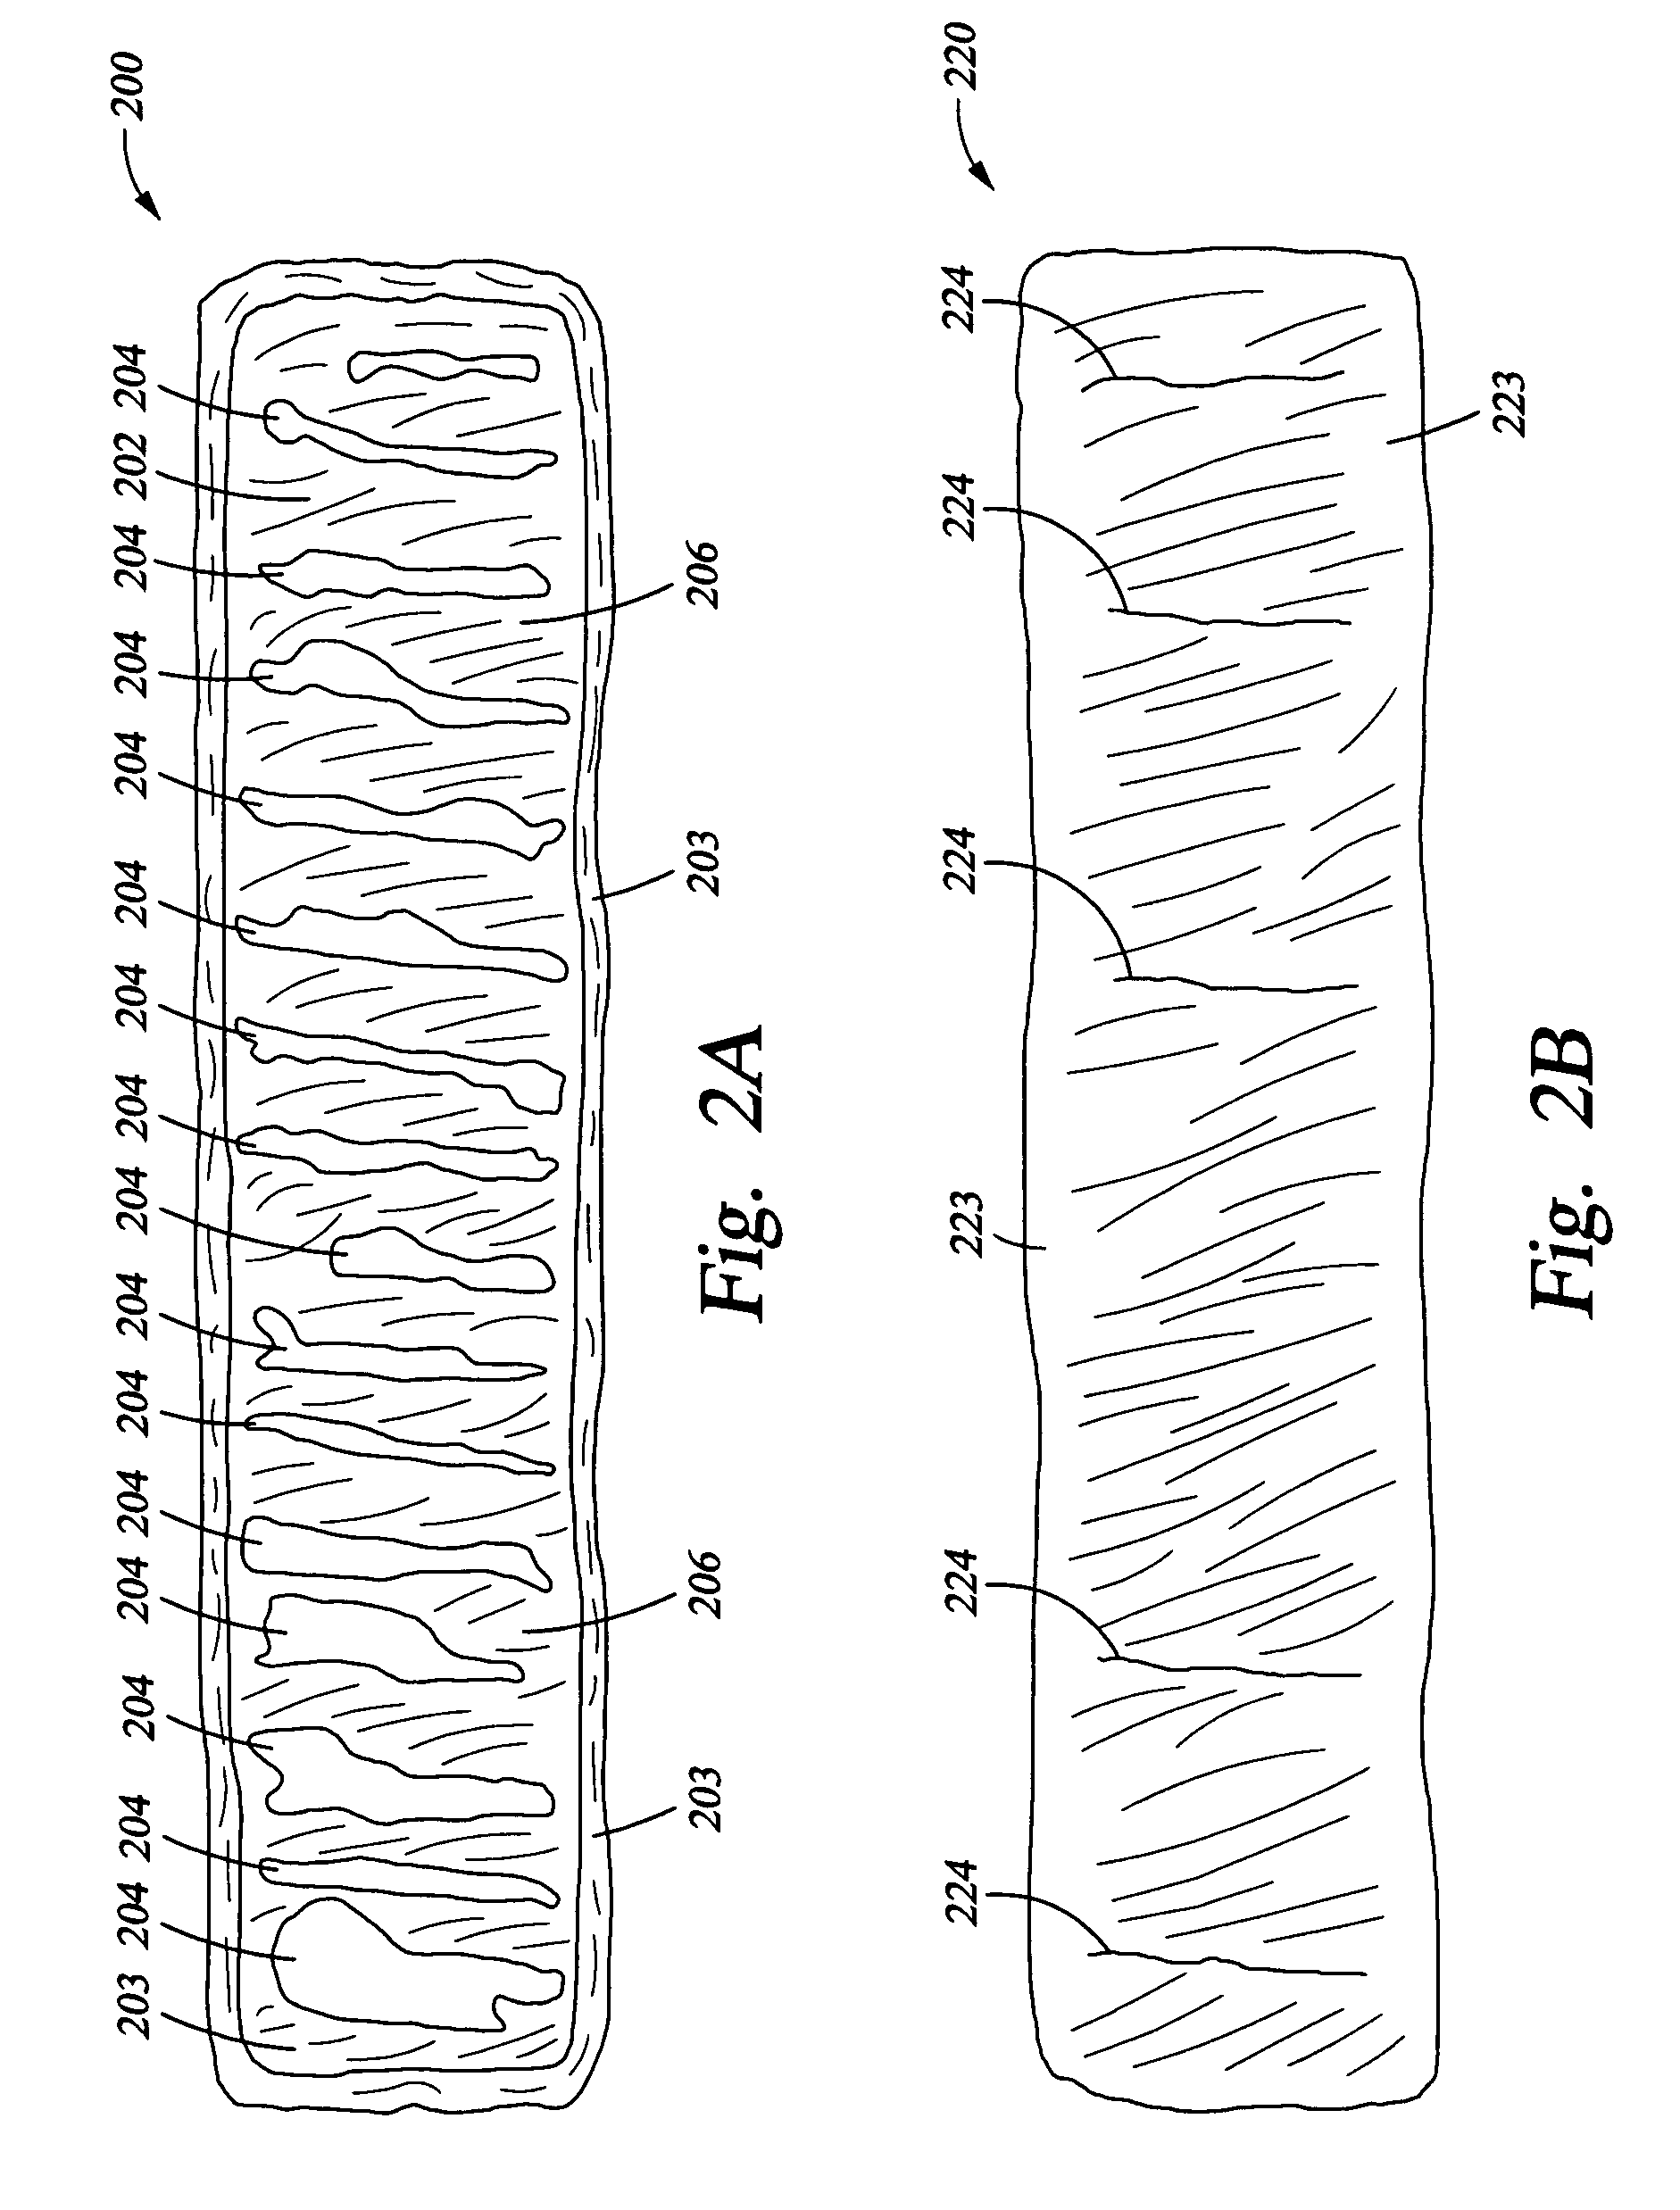 Stimulant-containing nutrition bar product and method of manufacture